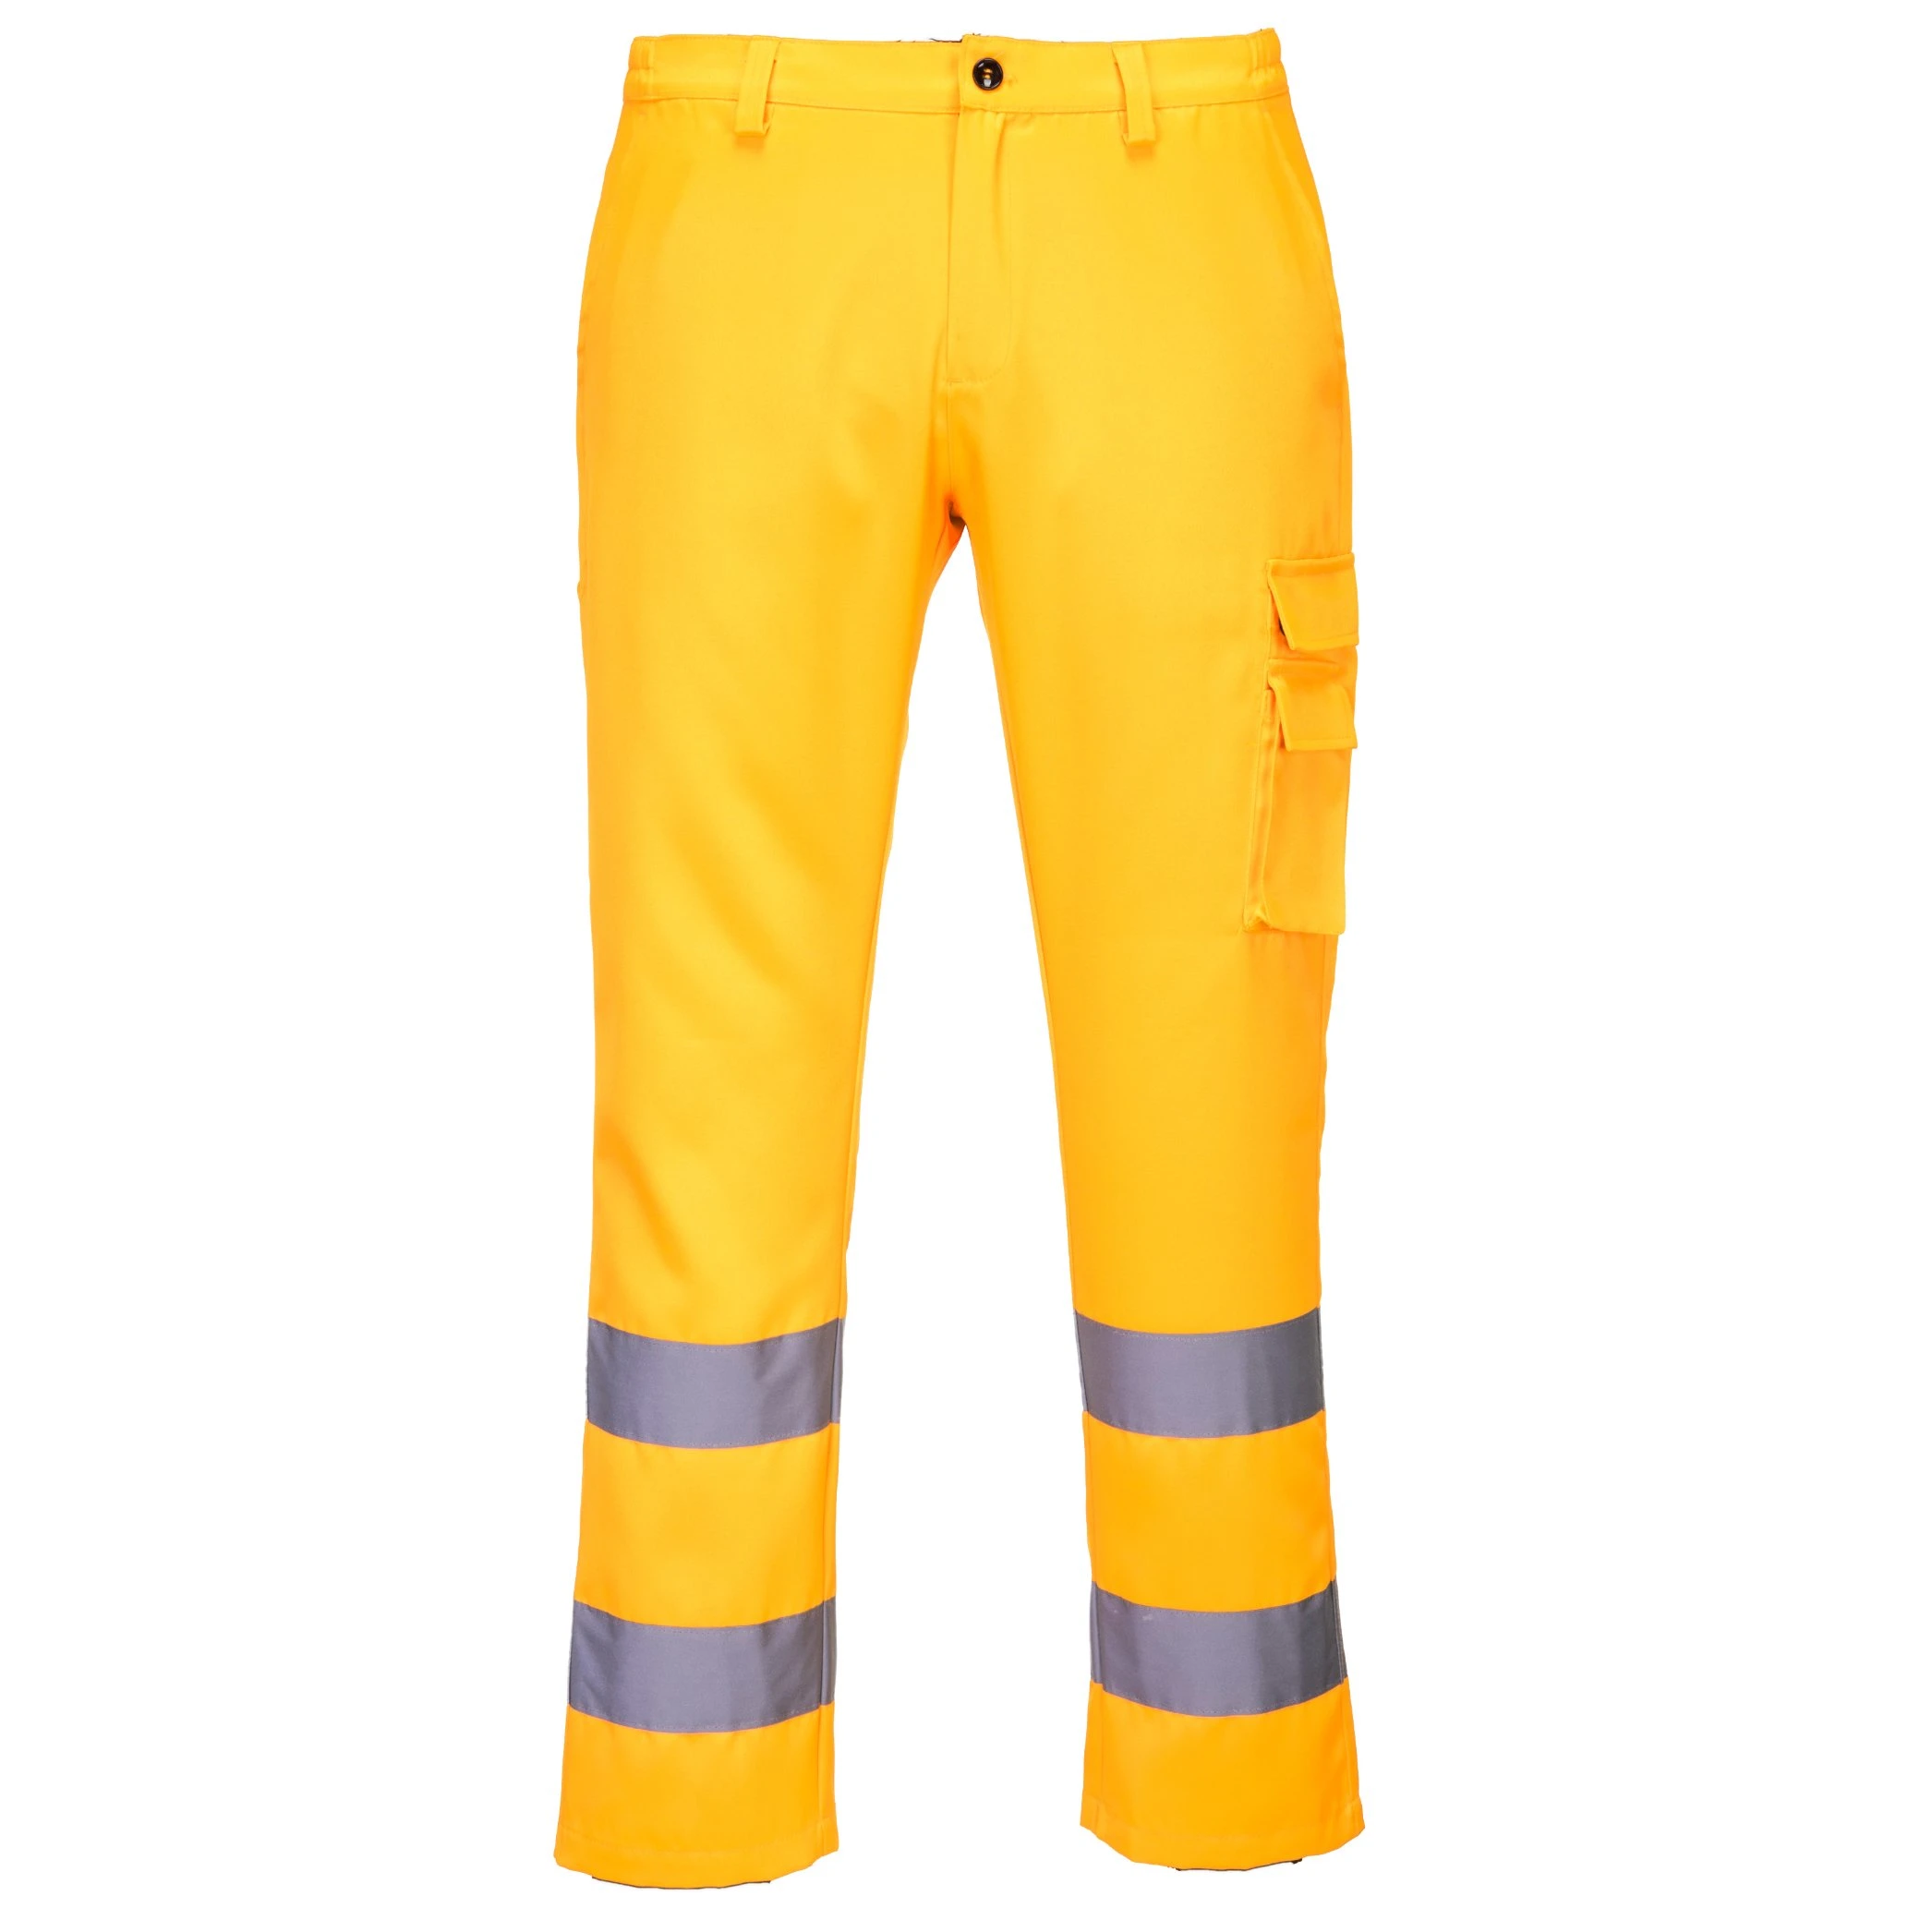 Safety High Visibility Pant